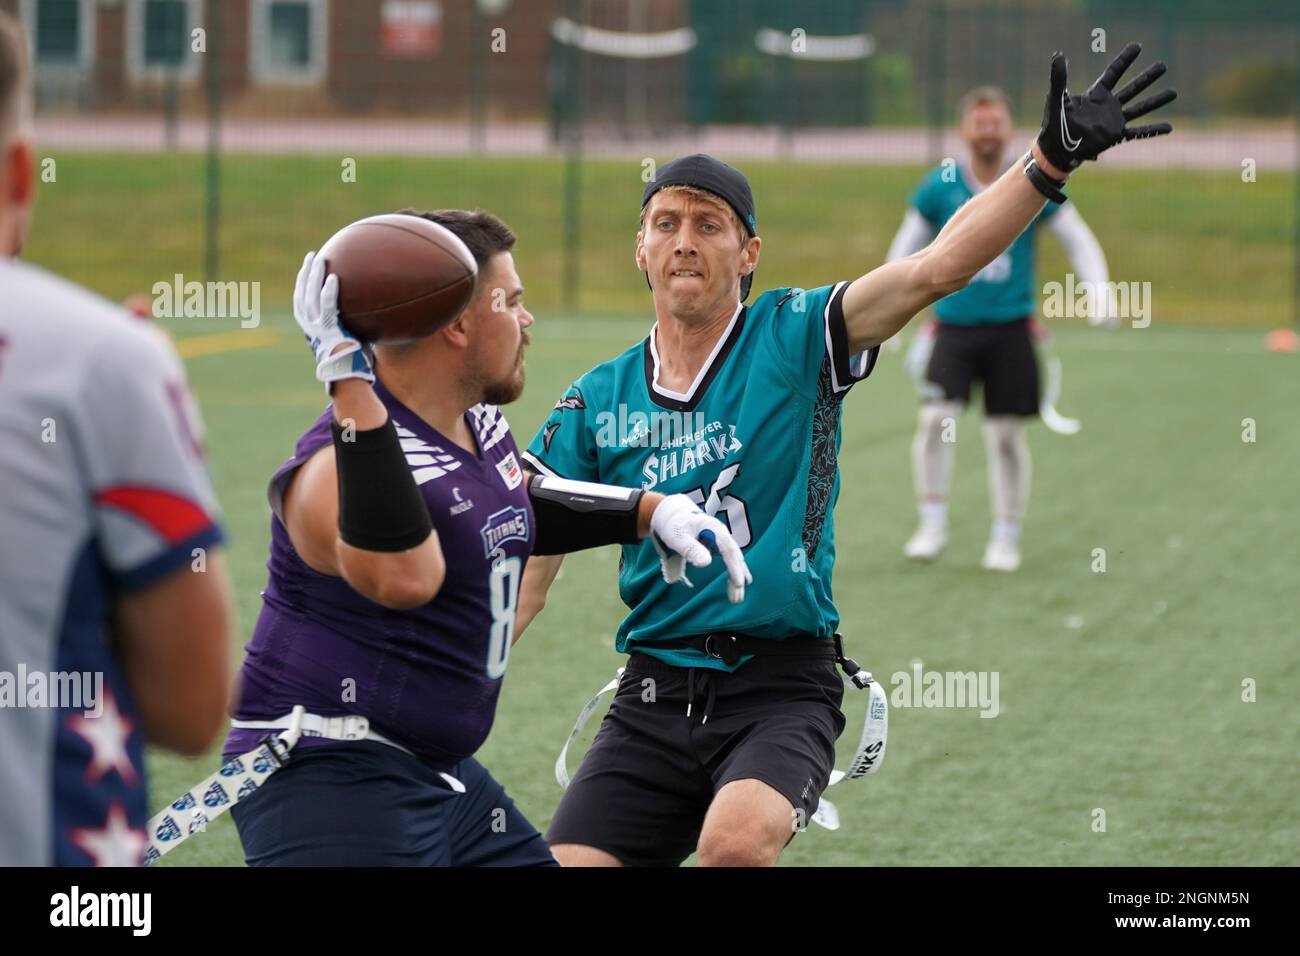 Rusher pressuring the Quaterback during a Flag Football game in Wales. Stock Photo